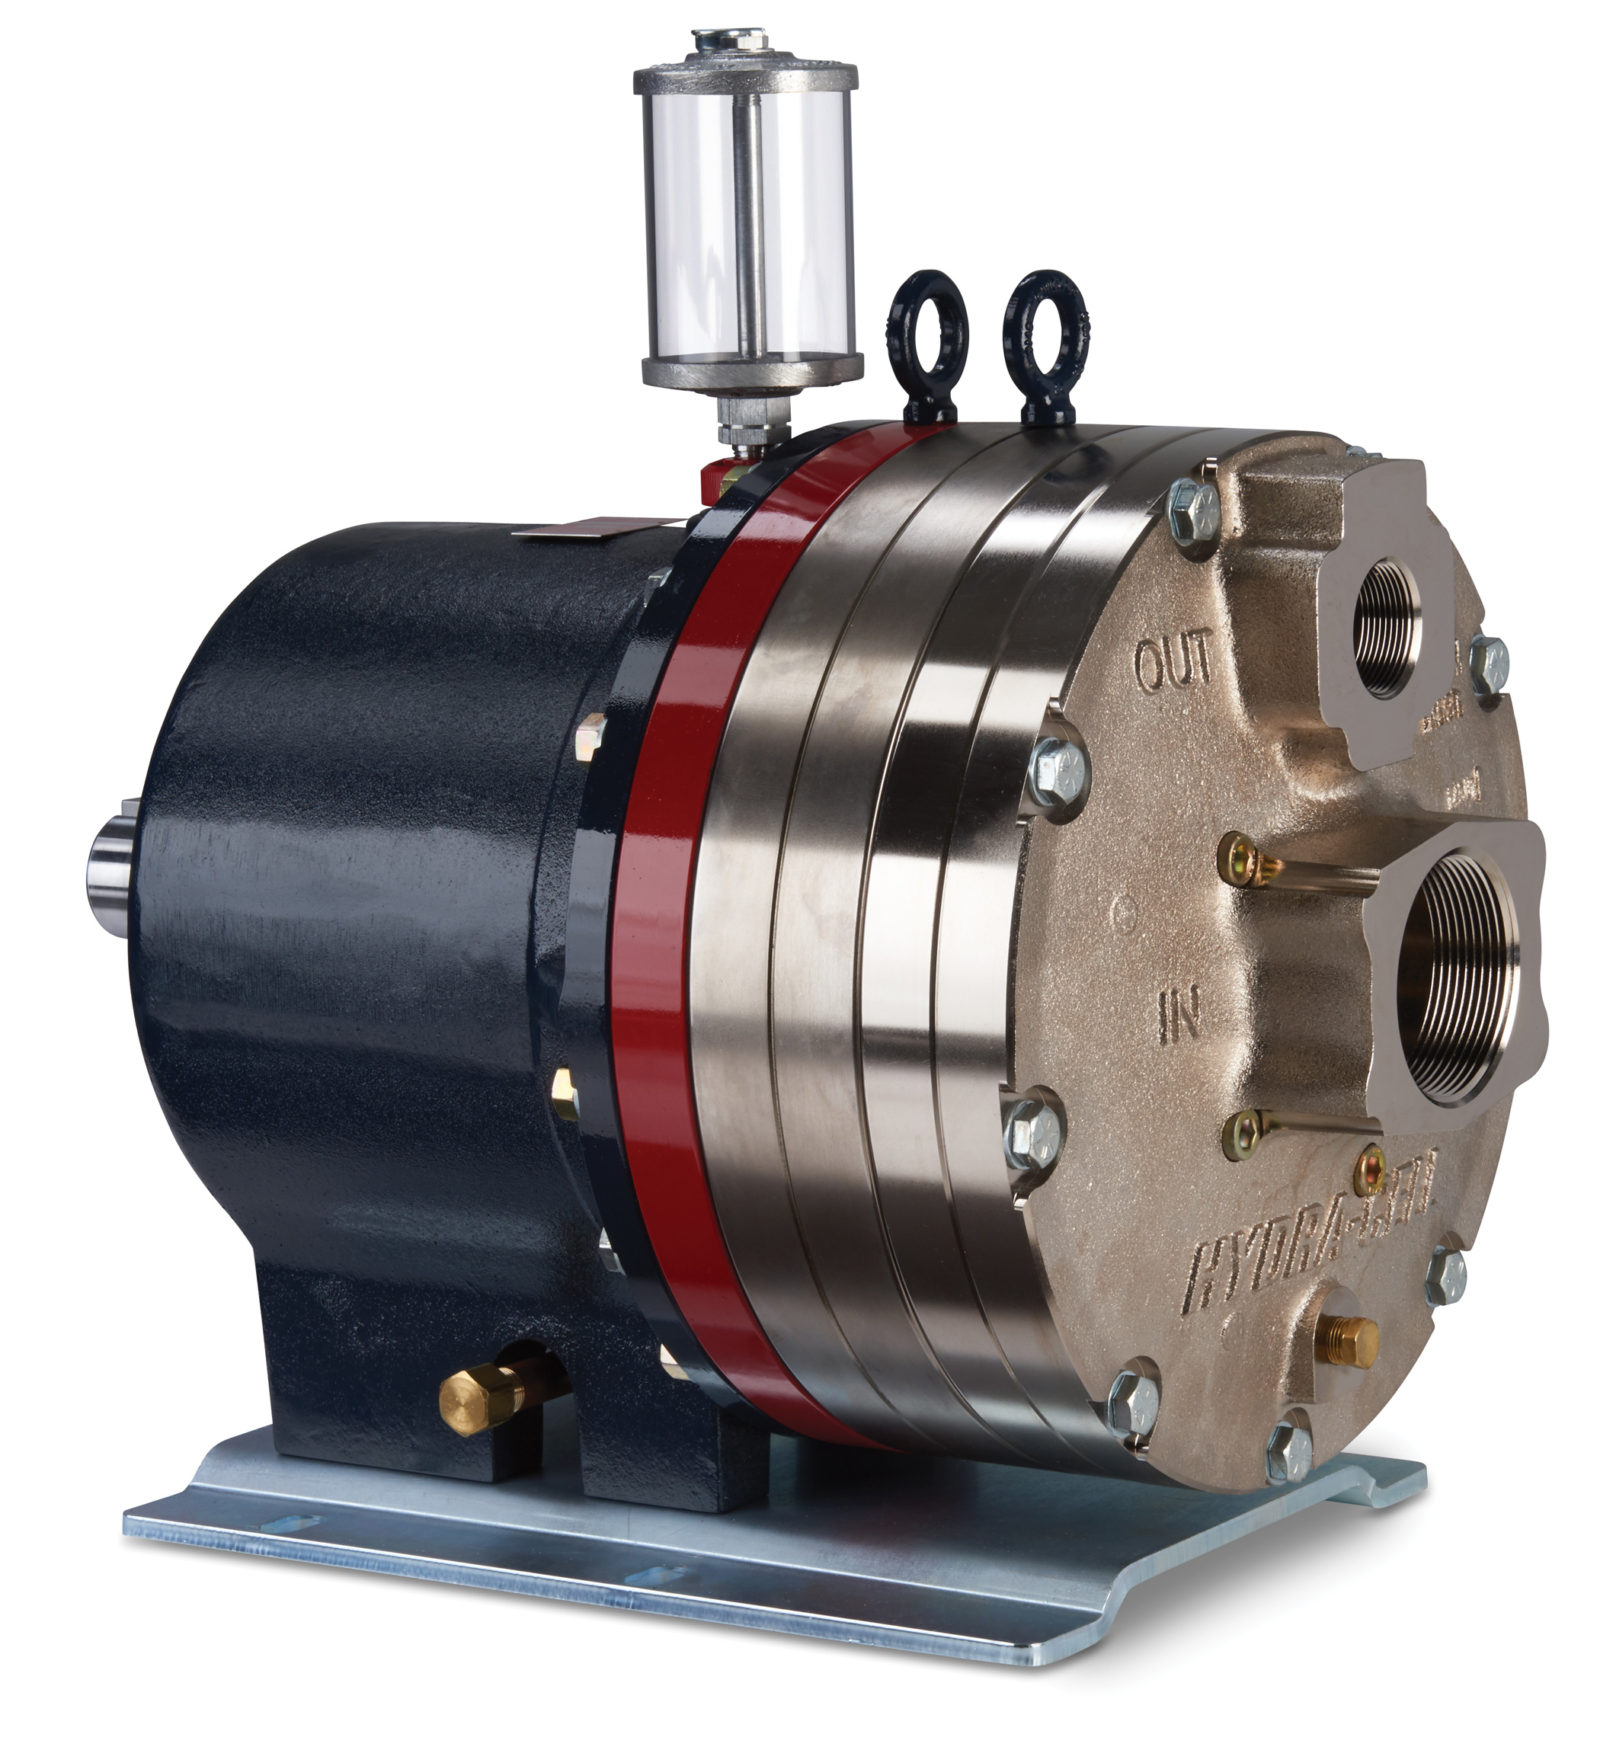 The seal-less design of Hydra-Cell D66 pumps means there are no mechanical seals, cups, or packing to leak, wear, or replace.